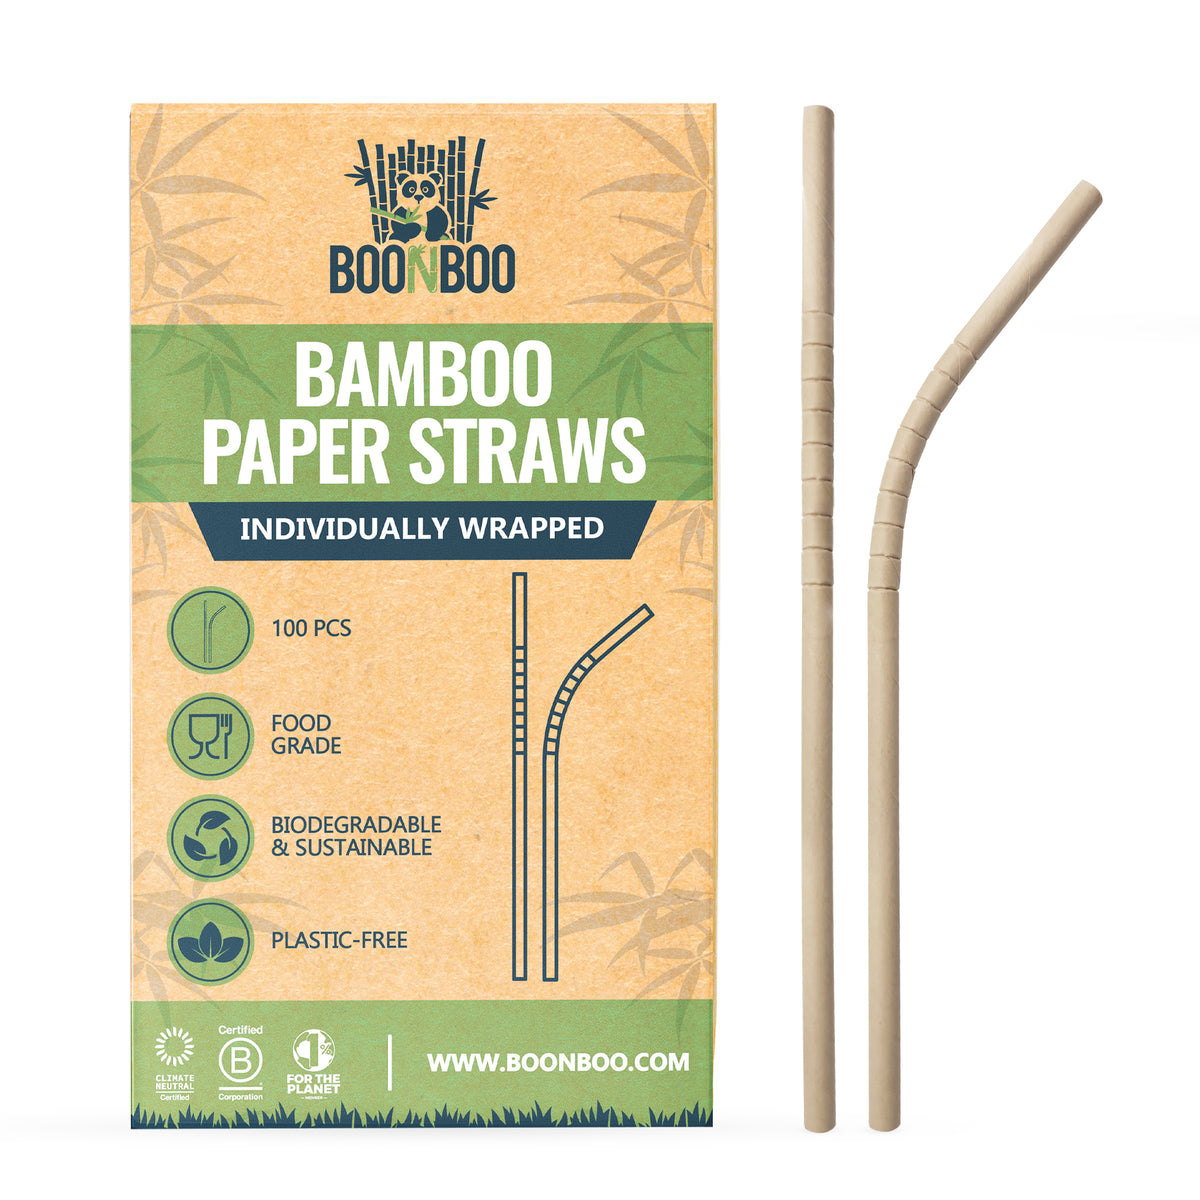 Boonboo Straws | 100% Bamboo Drinking Straws | Set of 16pcs + Cleaning Brush |100% Natural & Reusable | Sustainable Biodegradable & Plastic-Free